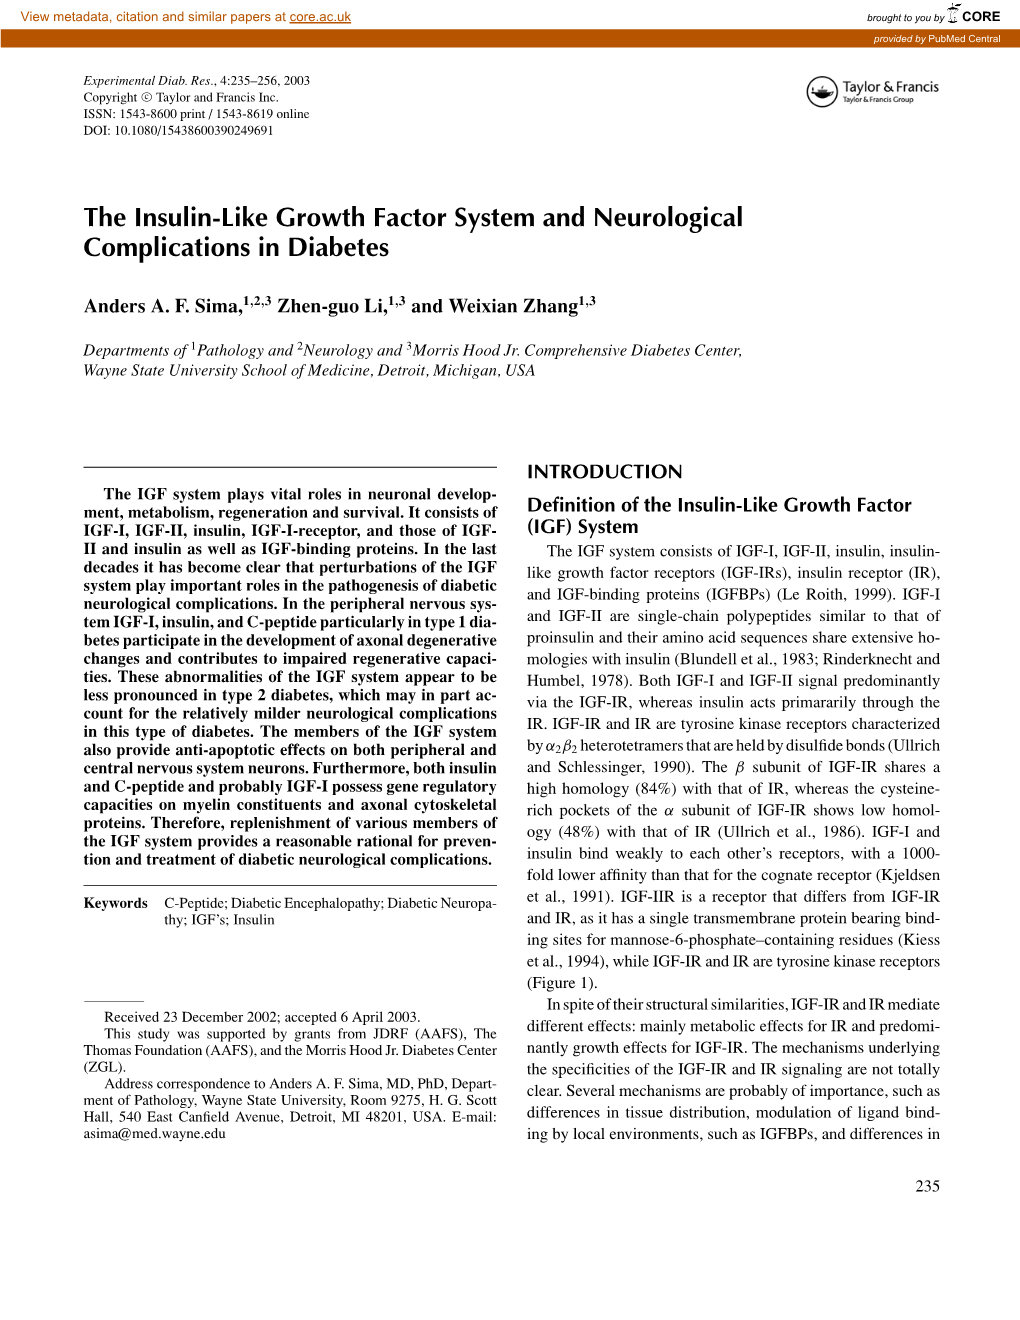 The Insulin-Like Growth Factor System and Neurological Complications in Diabetes